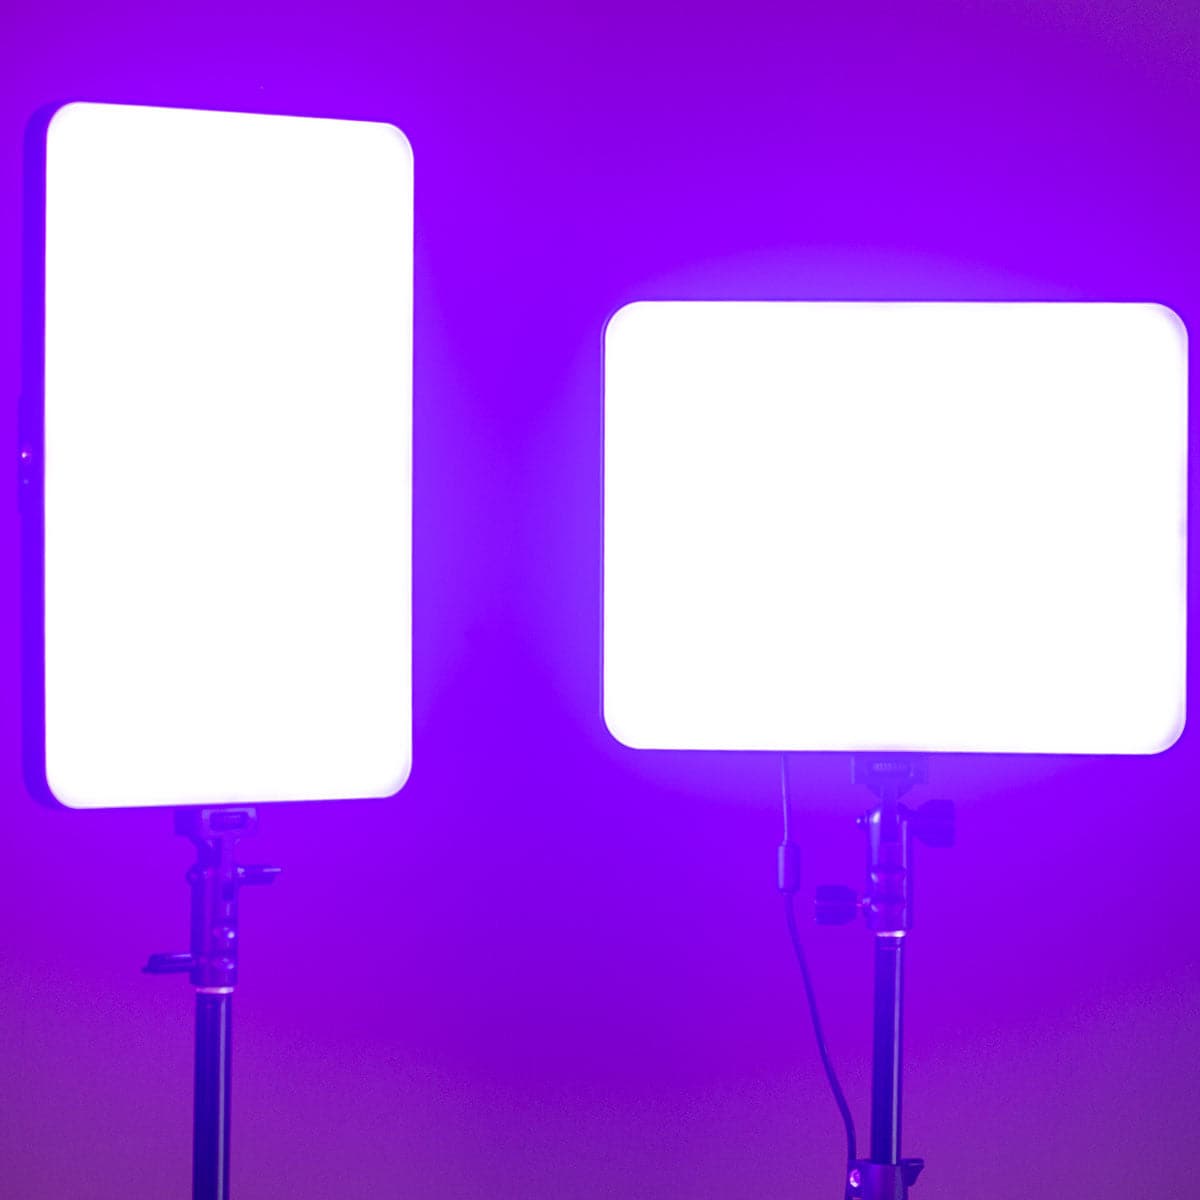 Weeylite sprite 40 RGB LED Light Panel 40W Full Color 2500K-8500K 29 Scenes Mode for Gaming Streaming/YouTube Broadcast/Tik Tok/Video/Photography